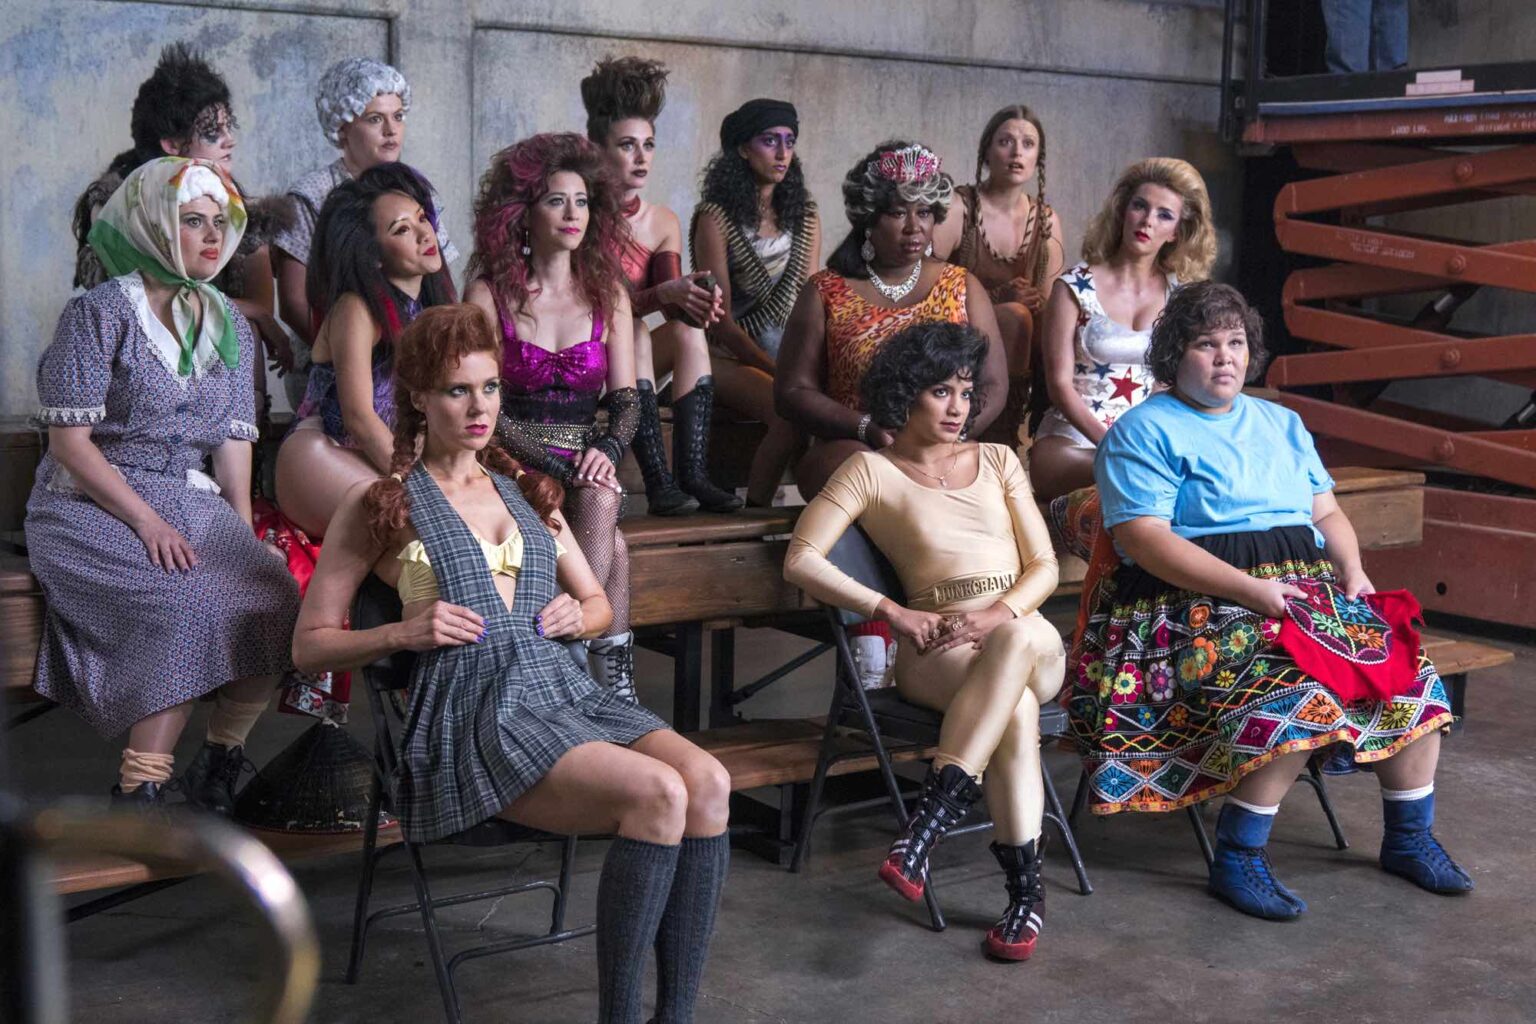 Can fans save 'GLOW' from cancellation? See what the cast is trying to do to save the Netflix series.